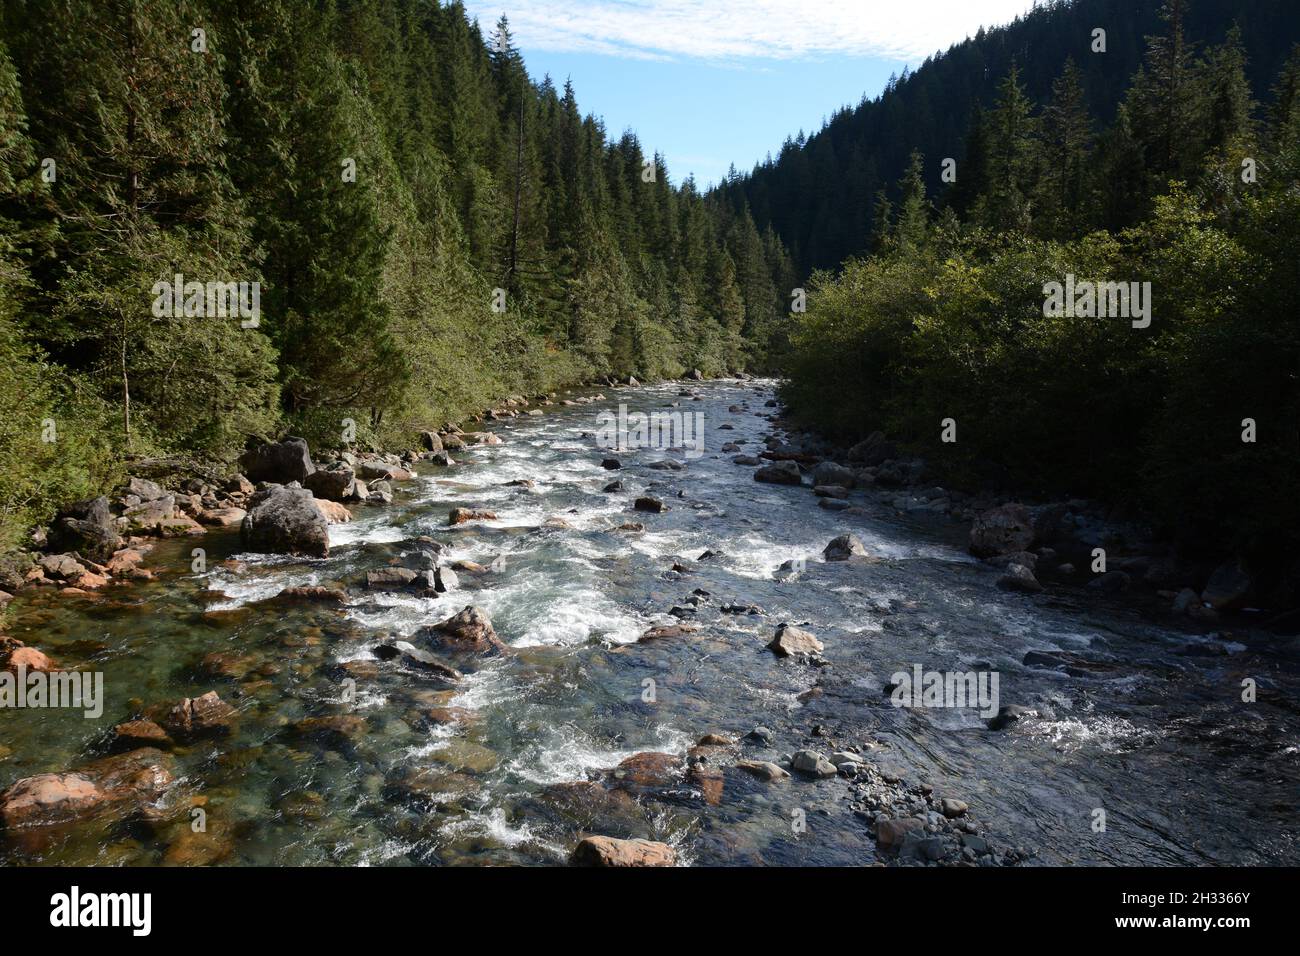 The Gold Creek river, temperate rainforest and Coast Mountains of Golden Ears Provincial Park, near Maple Ridge, British Columbia, Canada. Stock Photo